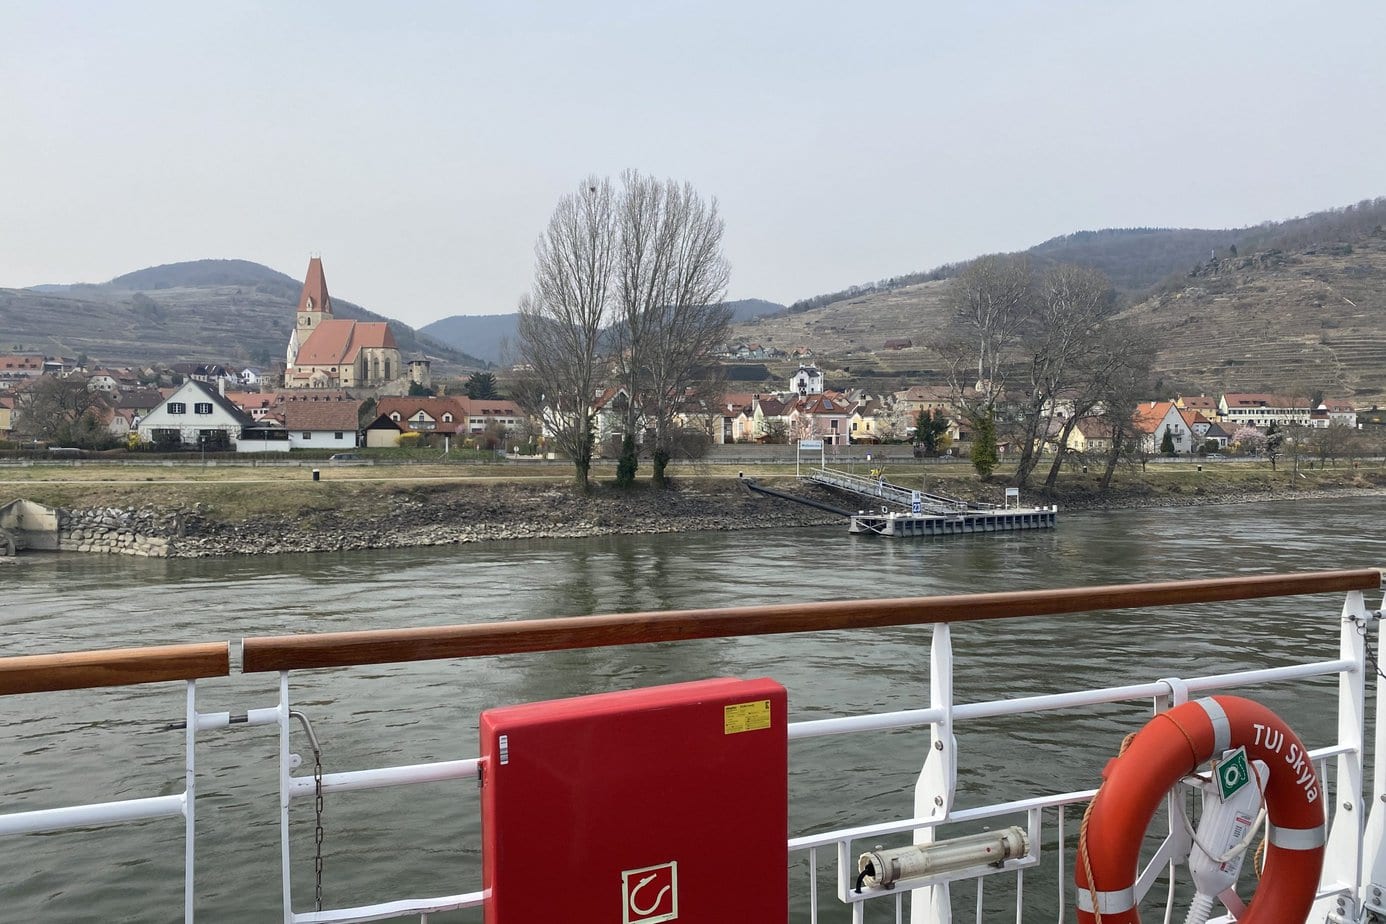 tui river cruise on the danube germany and austria